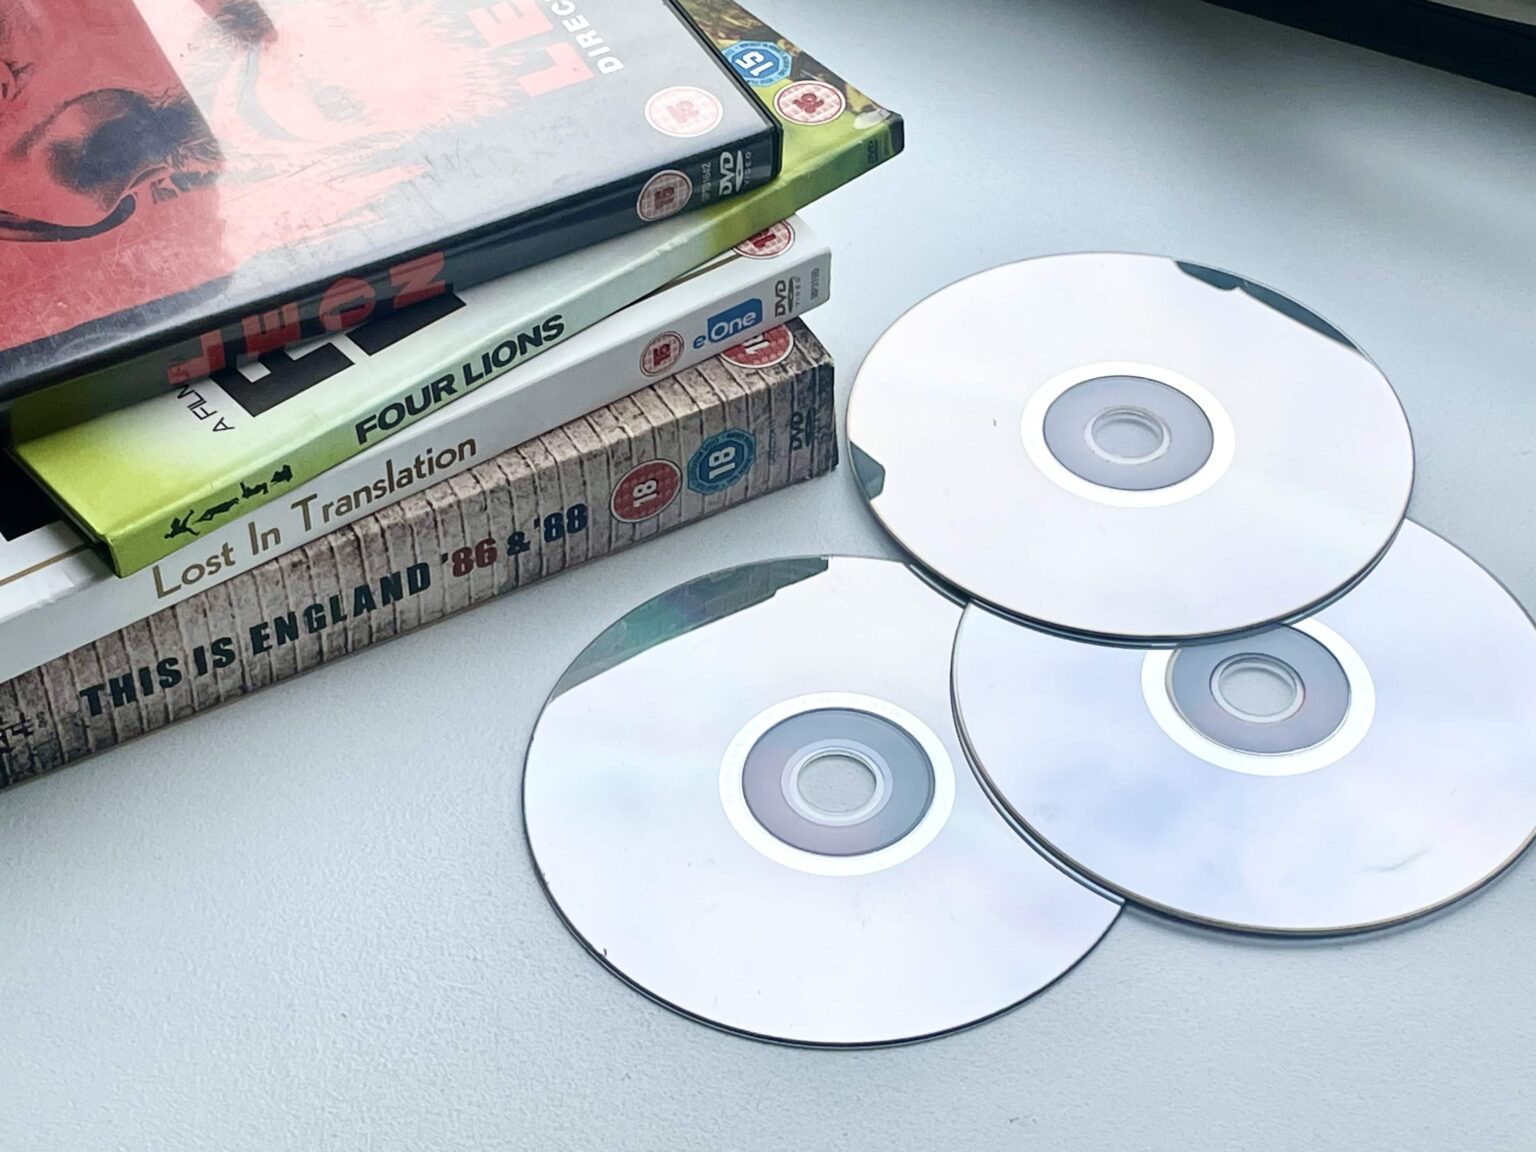 Boffins in China develop a revolutionary DVD capable of storing a petabyte of data, equivalent to 220,000 regular DVDs. With 100 layers, this innovation promises vast storage and extended video time. Although not yet widely available due to energy consumption during writing, researchers foresee its future application in data storage.